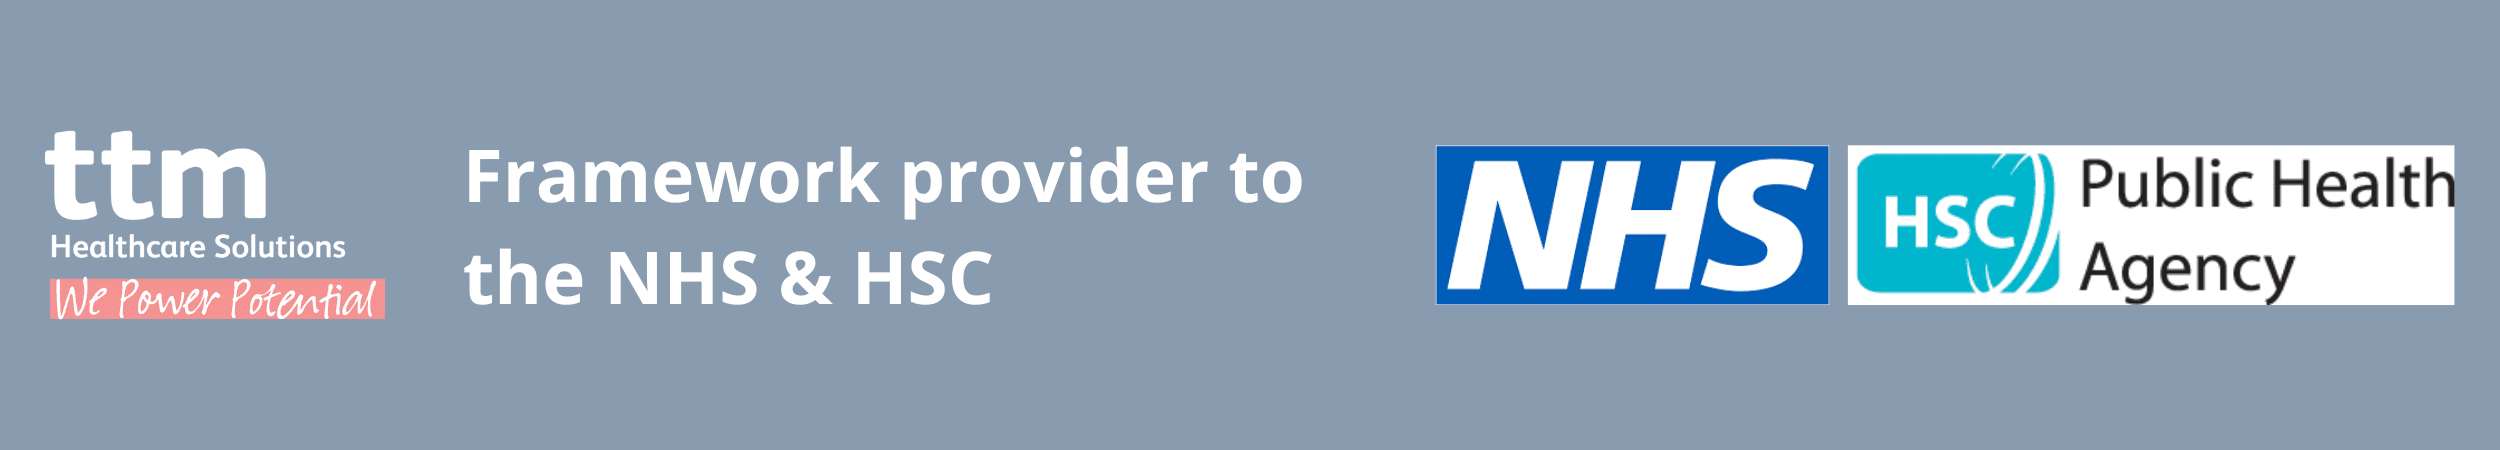 Framework provider to the NHS and HSC